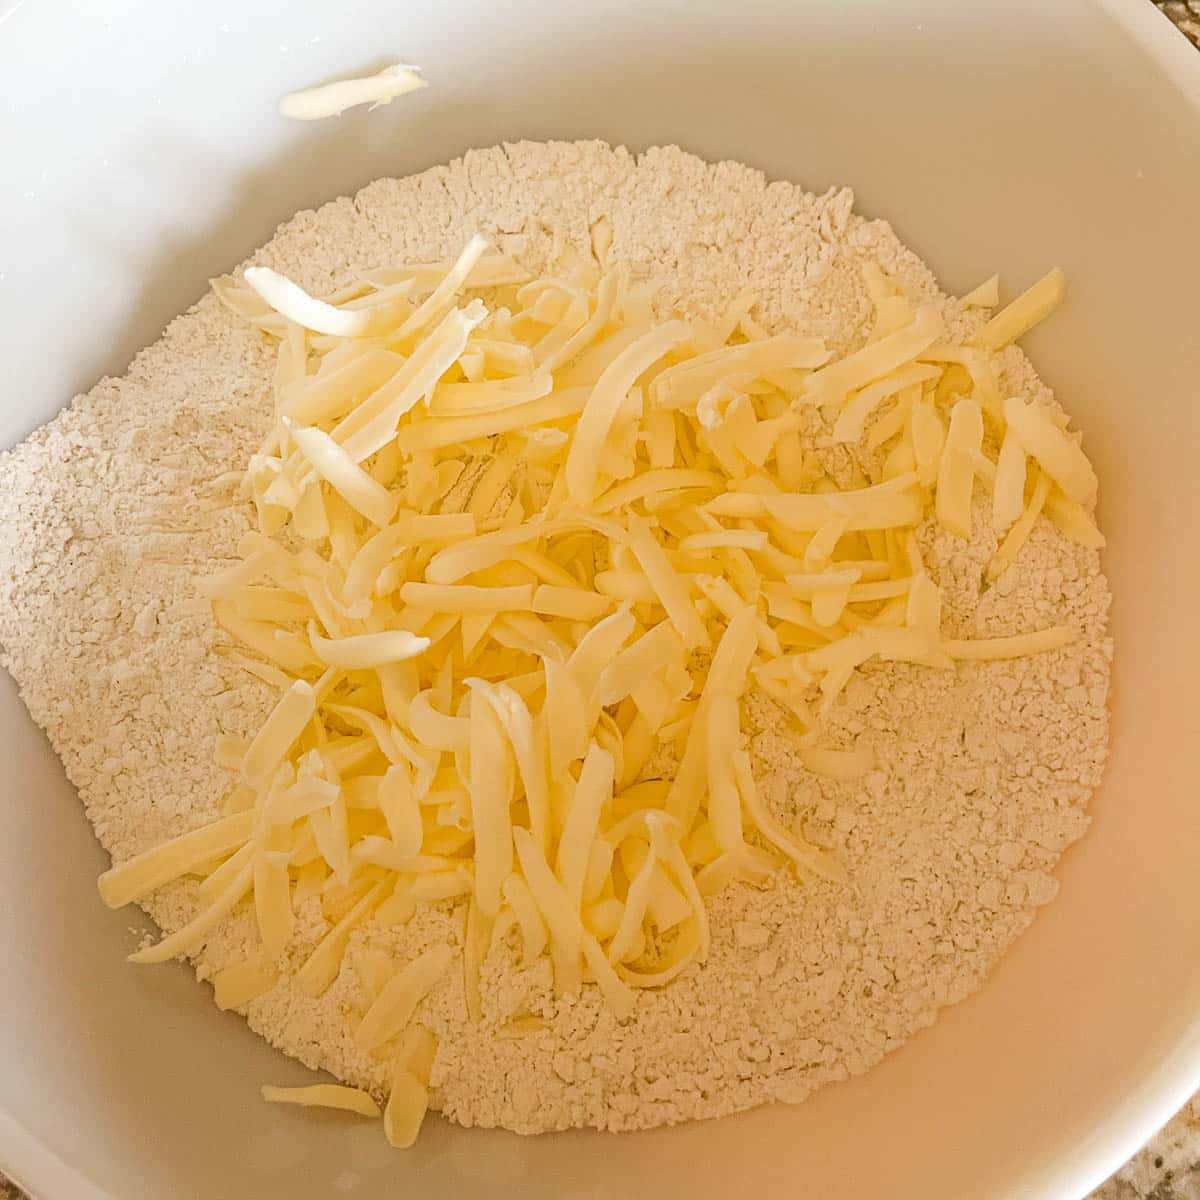 scone flour mixture with shredded butter